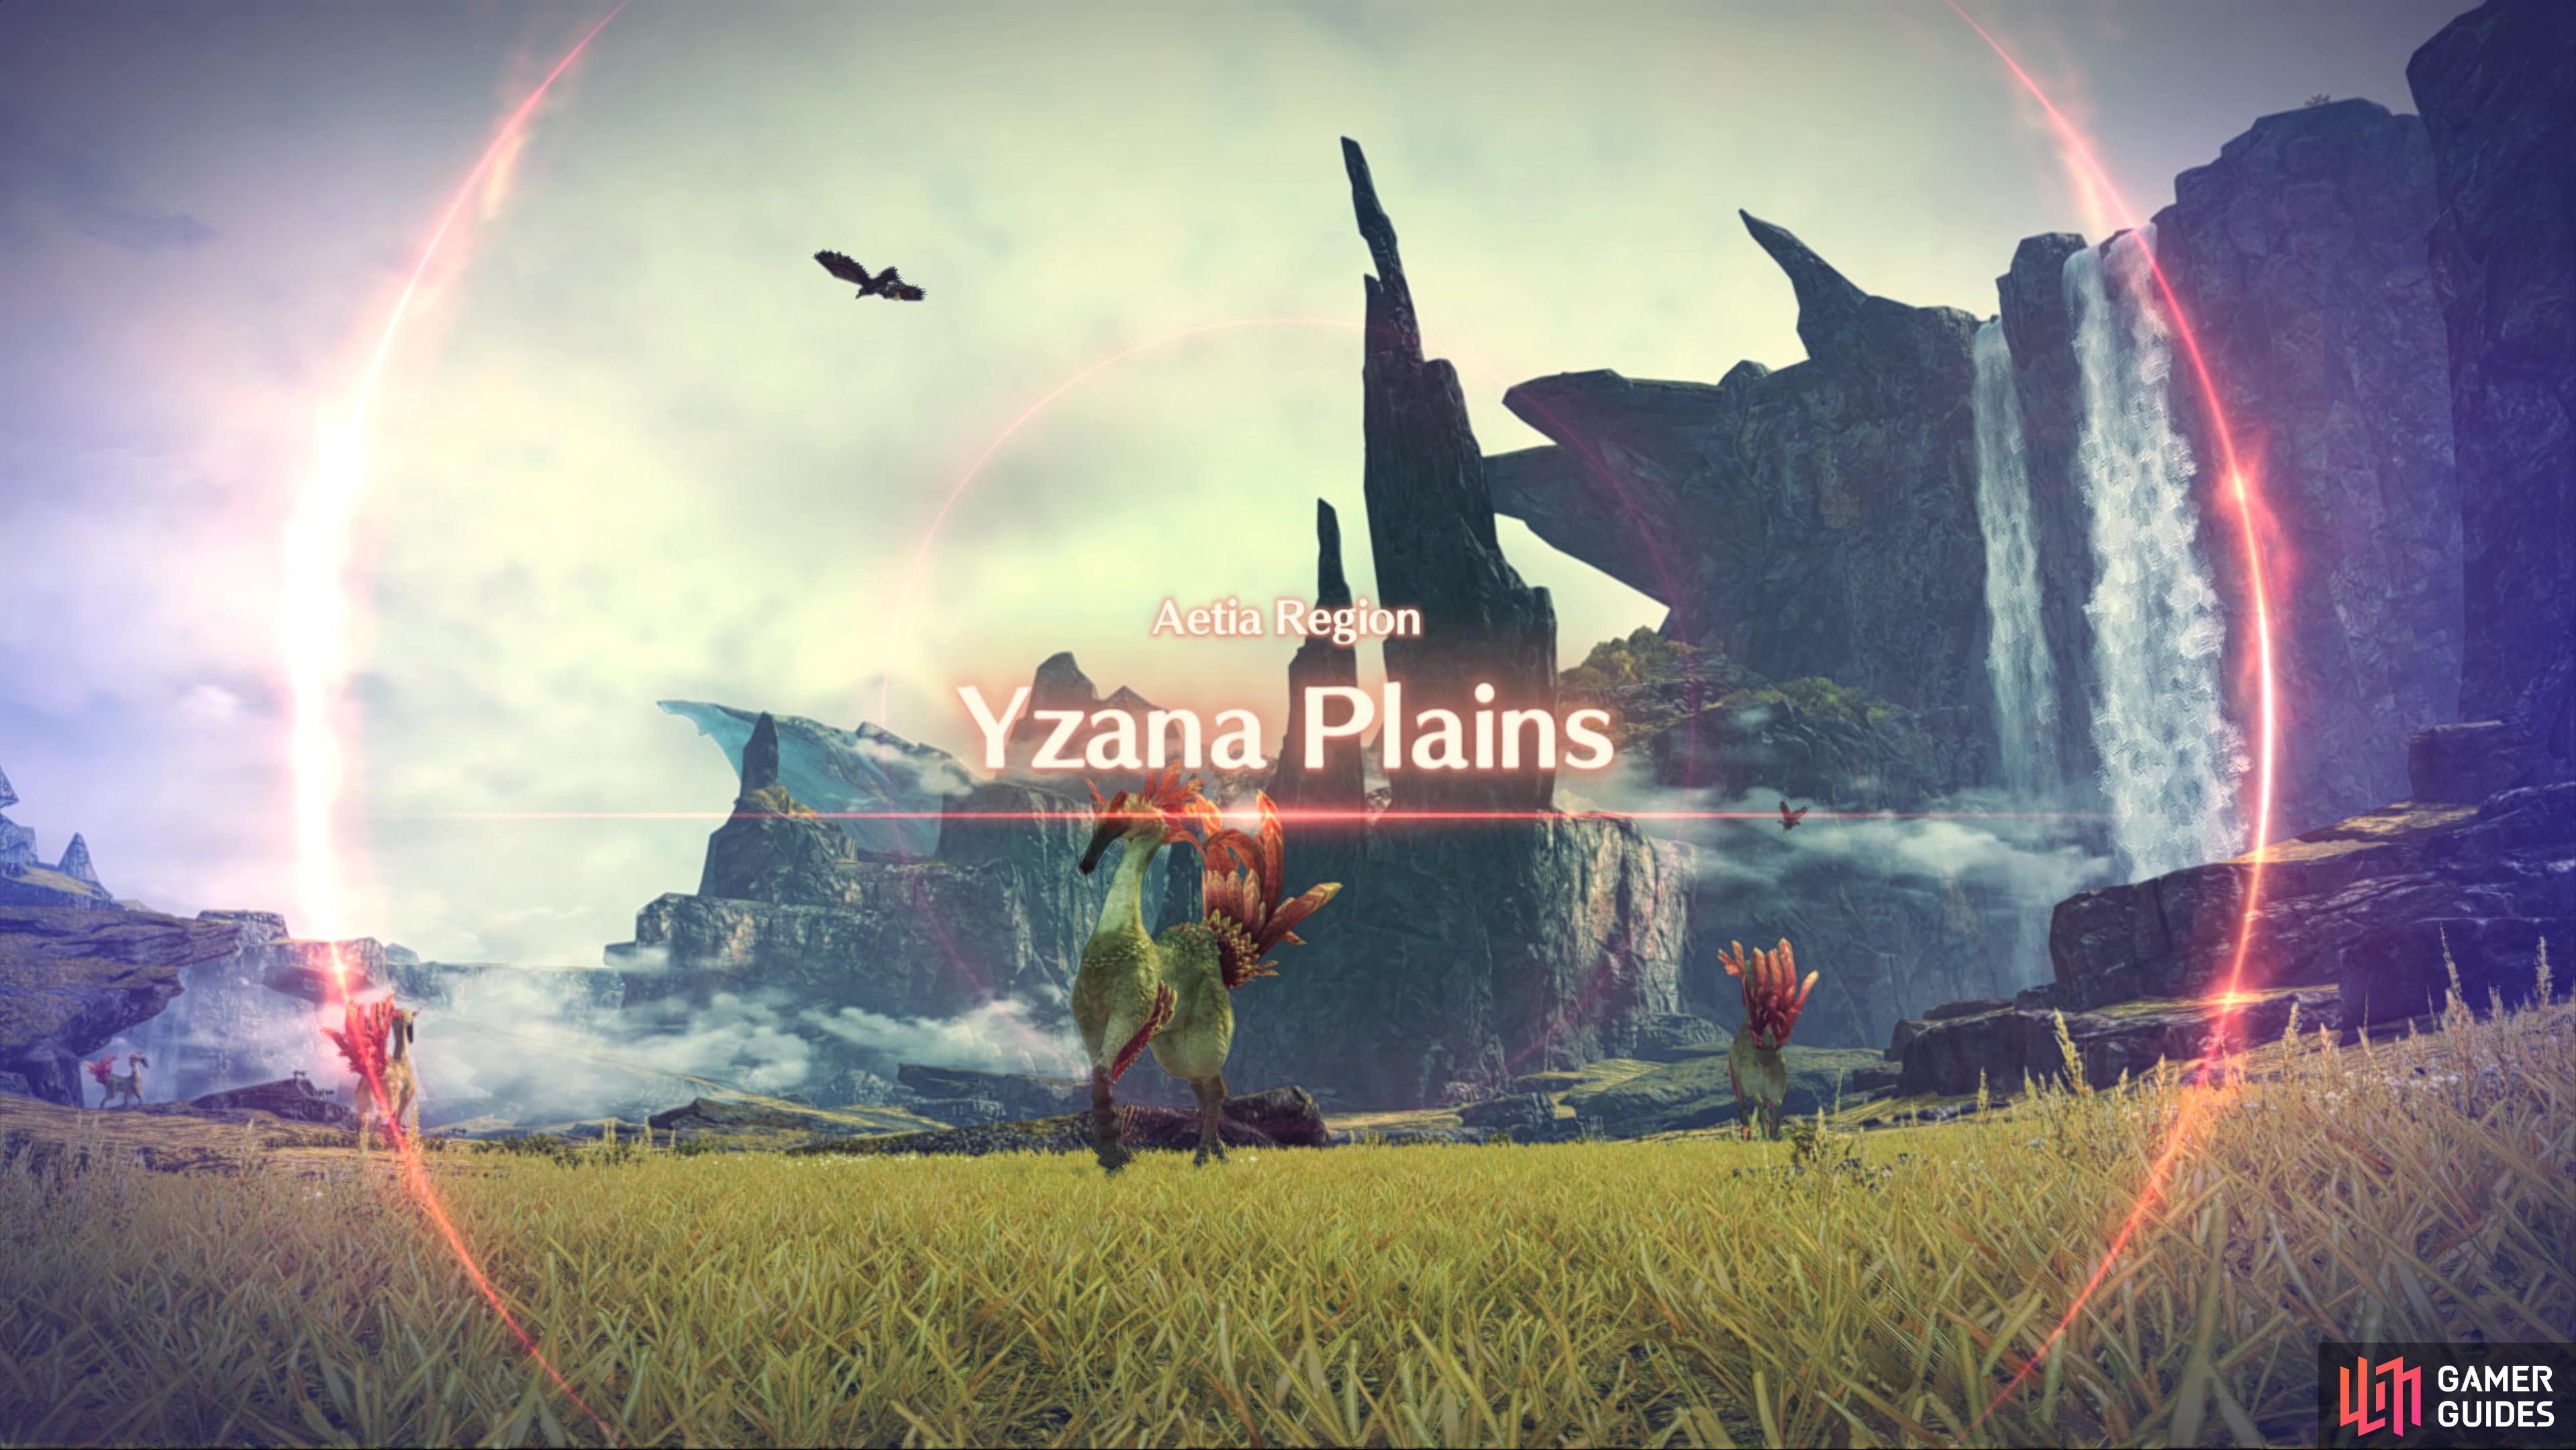 The Yzana Plains is the first chance you have to explore freely.